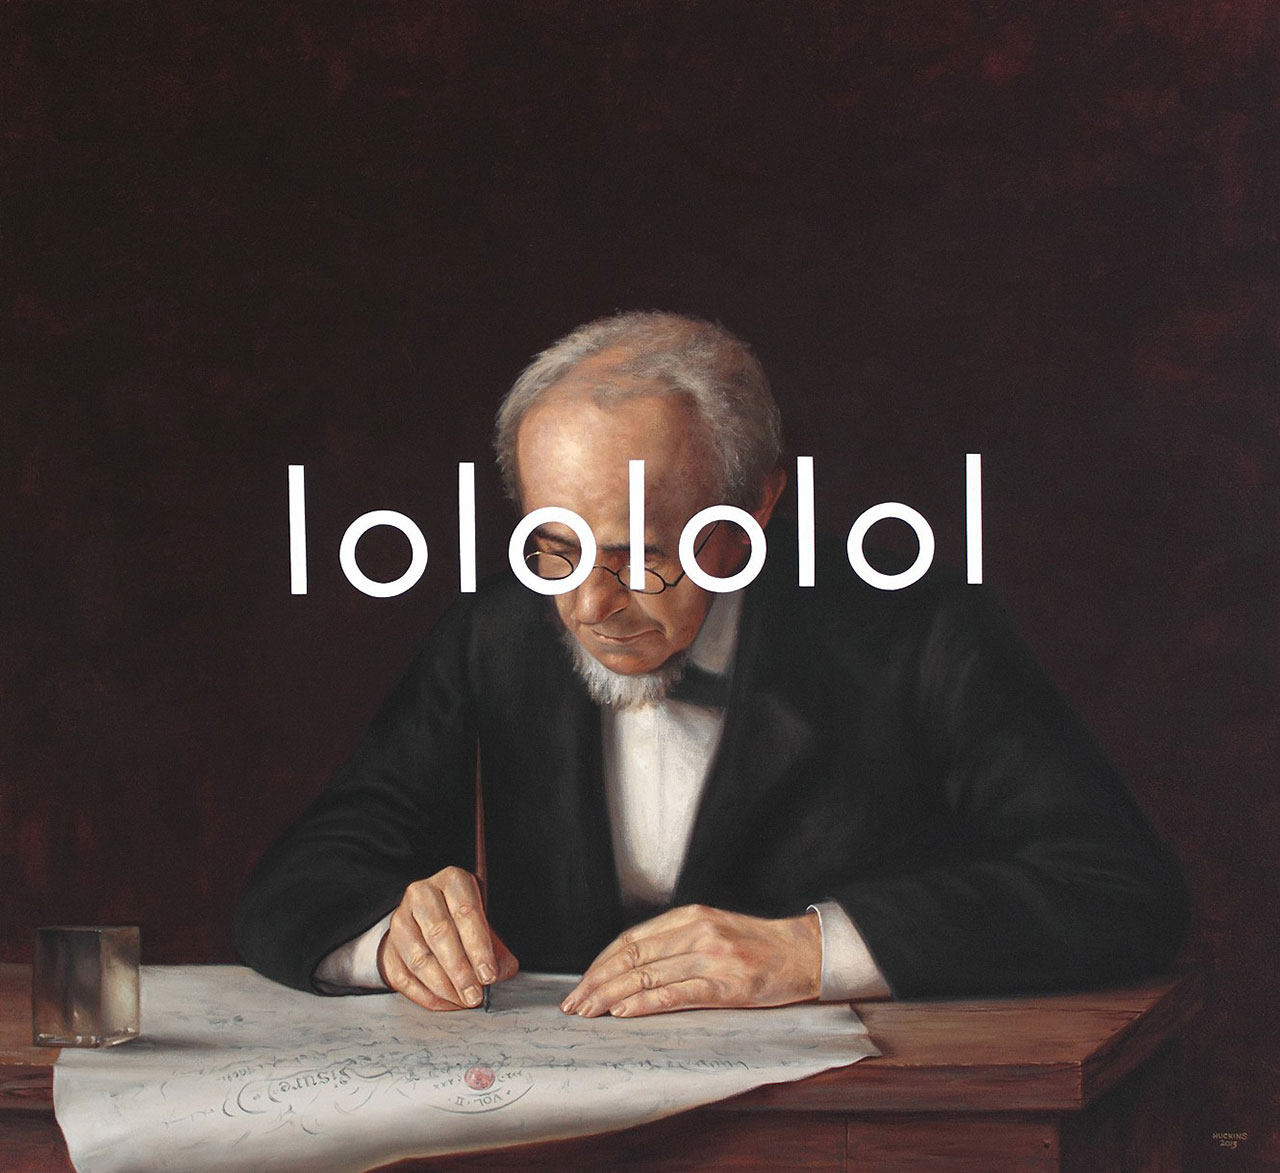 Shawn Huckins, The Writing Master: Laughing Out Loud Laughing Out Loud Laughing Out Loud Laughing Out Loud, acrylic on canvas, 33 x 36 in (83 x 91 cm), 2013. Private collection.